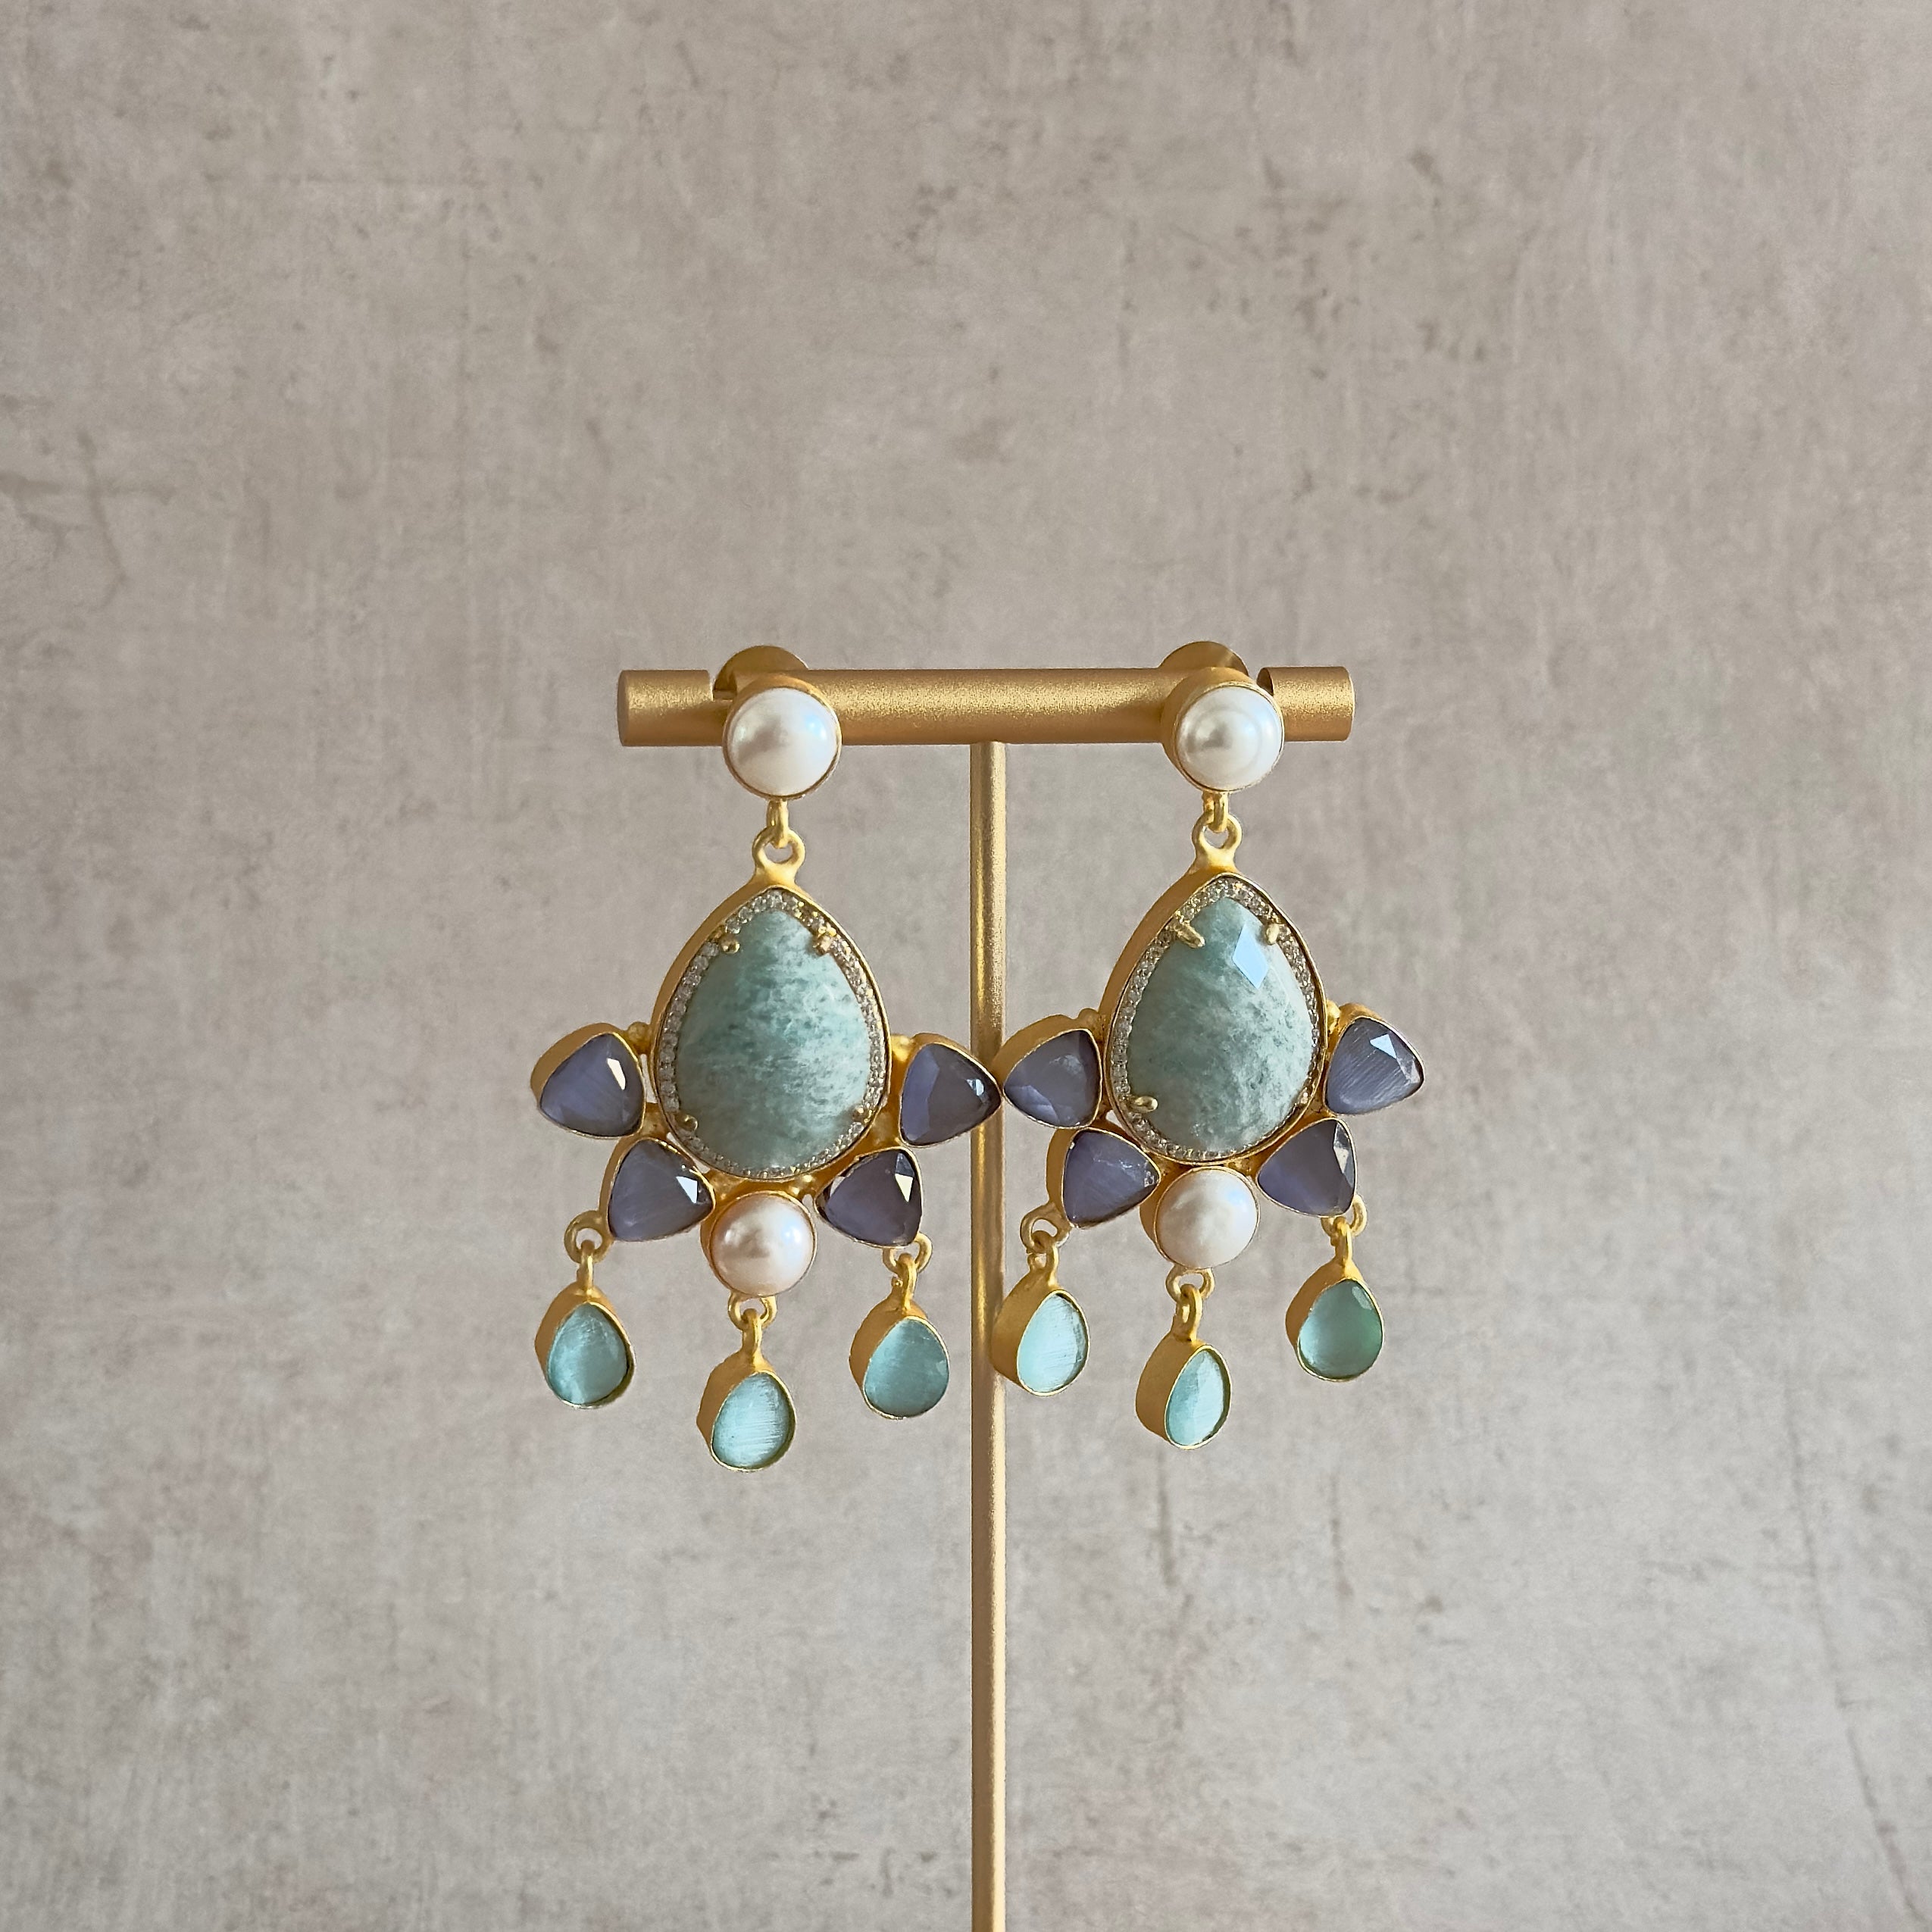 Elevate your style with our Nara Jade Drop Earrings. Made with multi gemstones, these earrings add a bold and sophisticated touch to your look. The perfect statement accessory for any occasion, these earrings exude luxury and exclusivity. Upgrade your jewelry collection with this stunning pair.